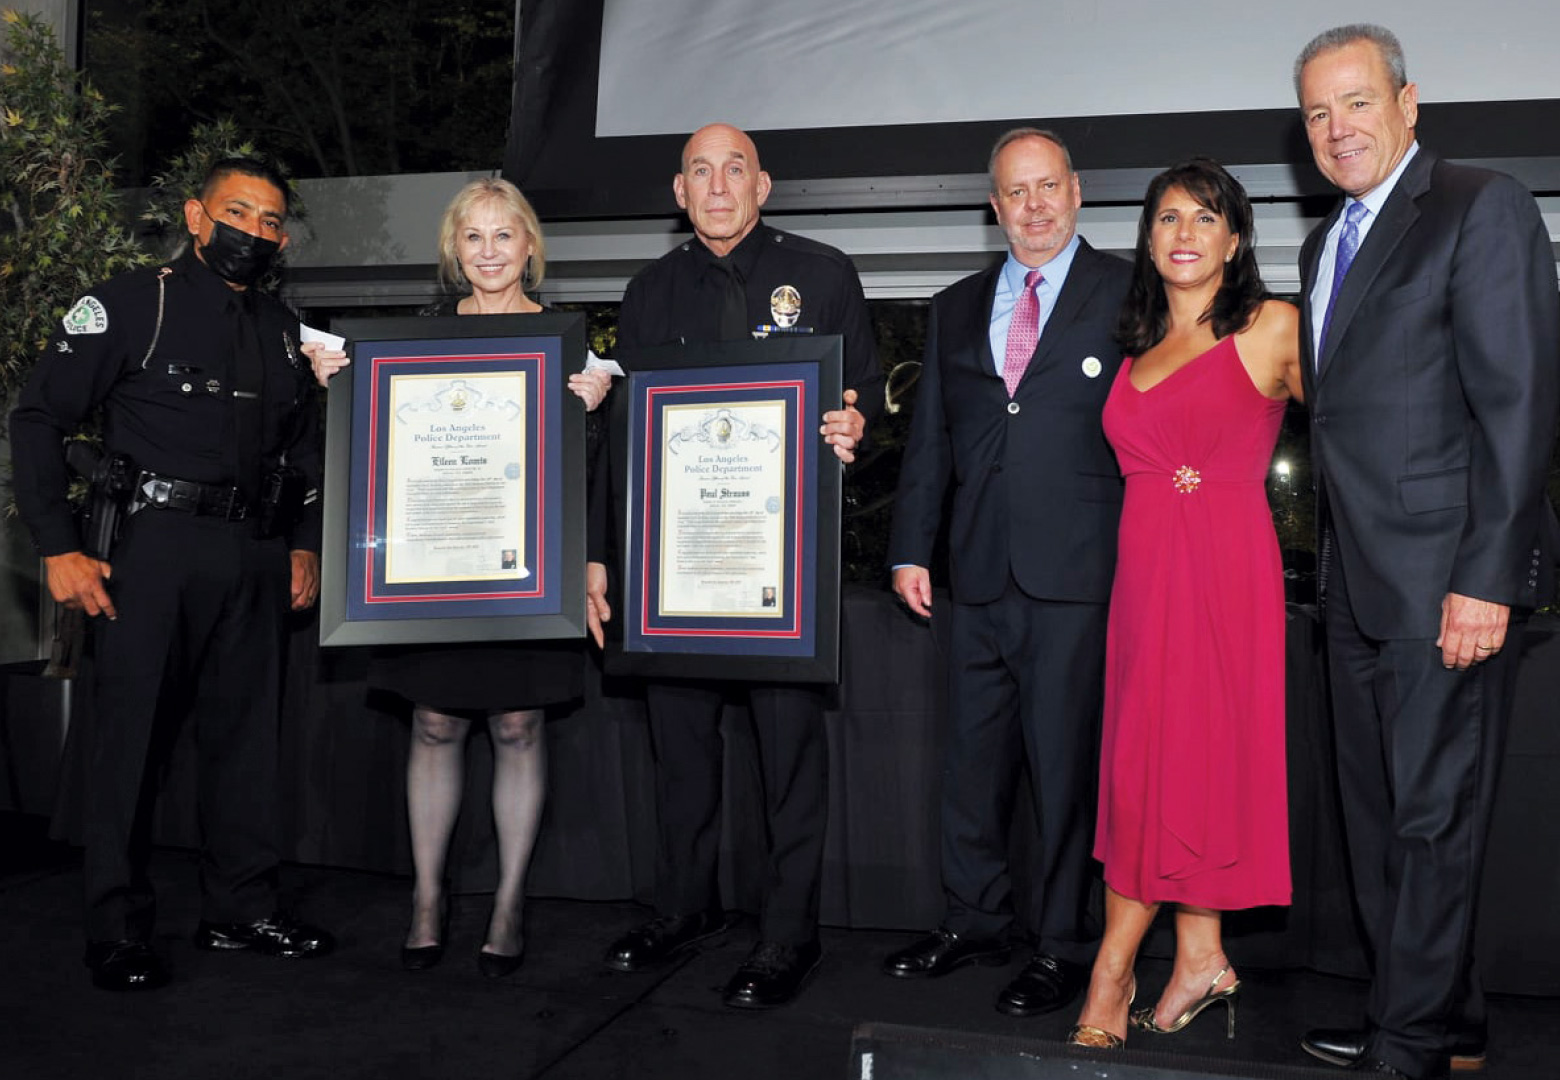 skirball-reopens-reserve-officer-of-the-year-twice-a-citizen-gala-6-officer-johnny-gil-department-reserve-officers-of-the-year-eileen-lomis-and-paul-strauss-laprf-presidents-michael-sellars-and-karl